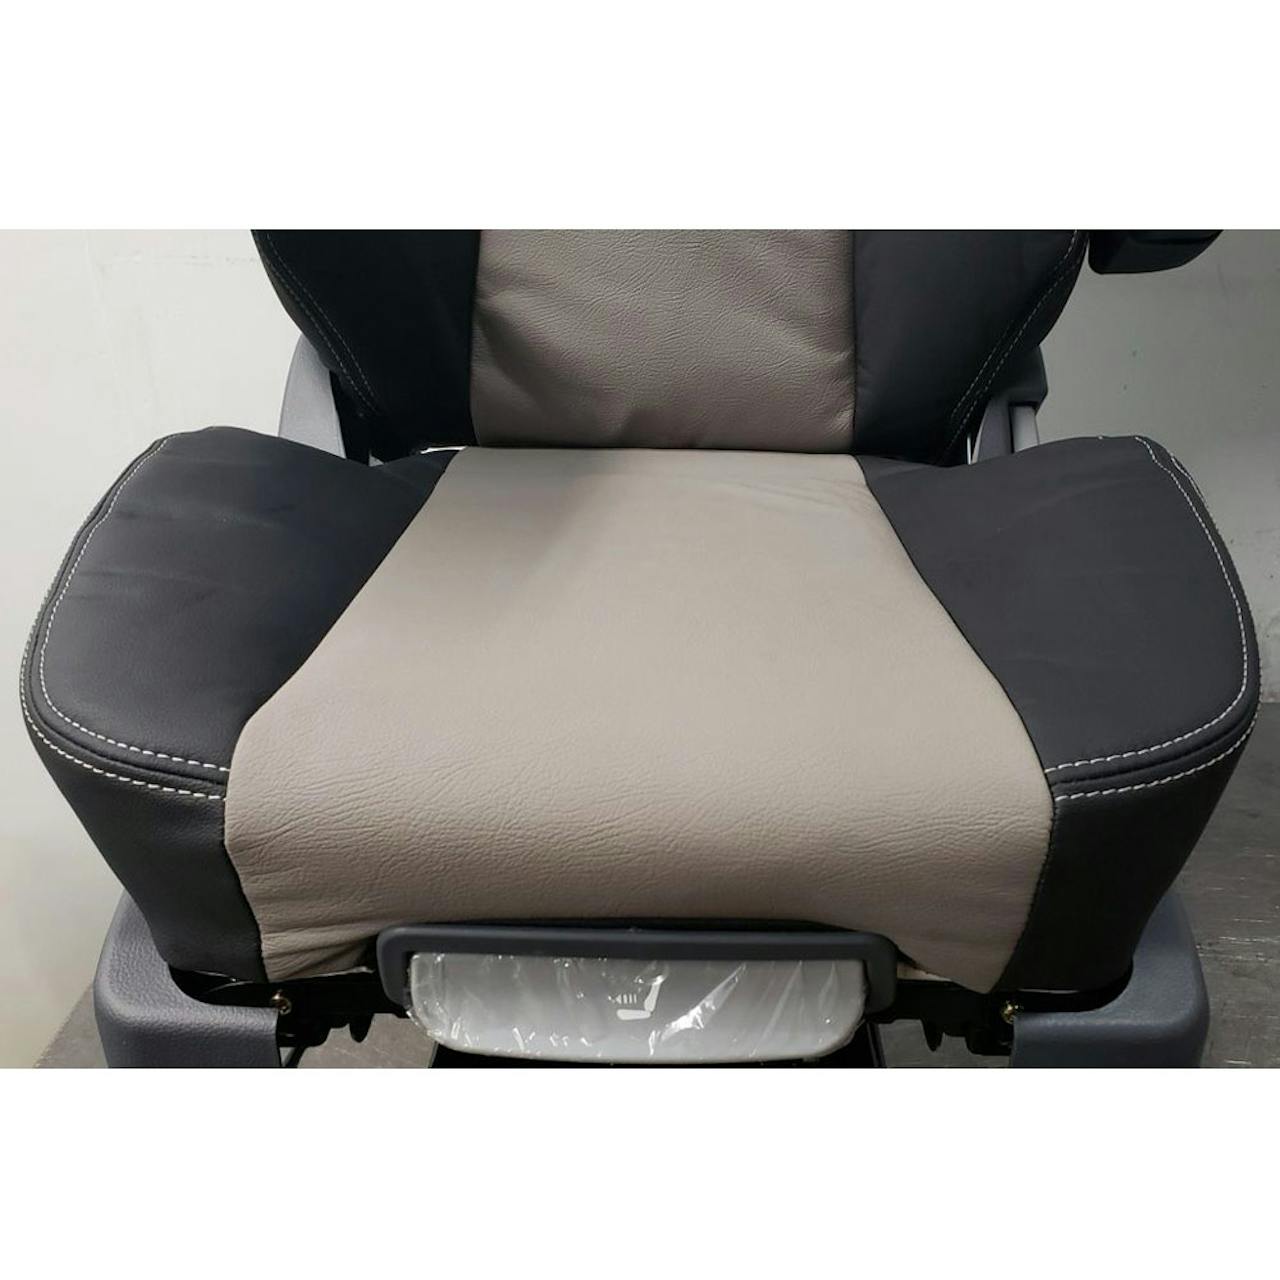 https://raneys-cdn11.imgix.net/images/stencil/original/products/207776/186016/68380-tc200-series-two-tone-leather-truck-seat-cushion__61356.1665676228.jpg?auto=compress,format&w=1280